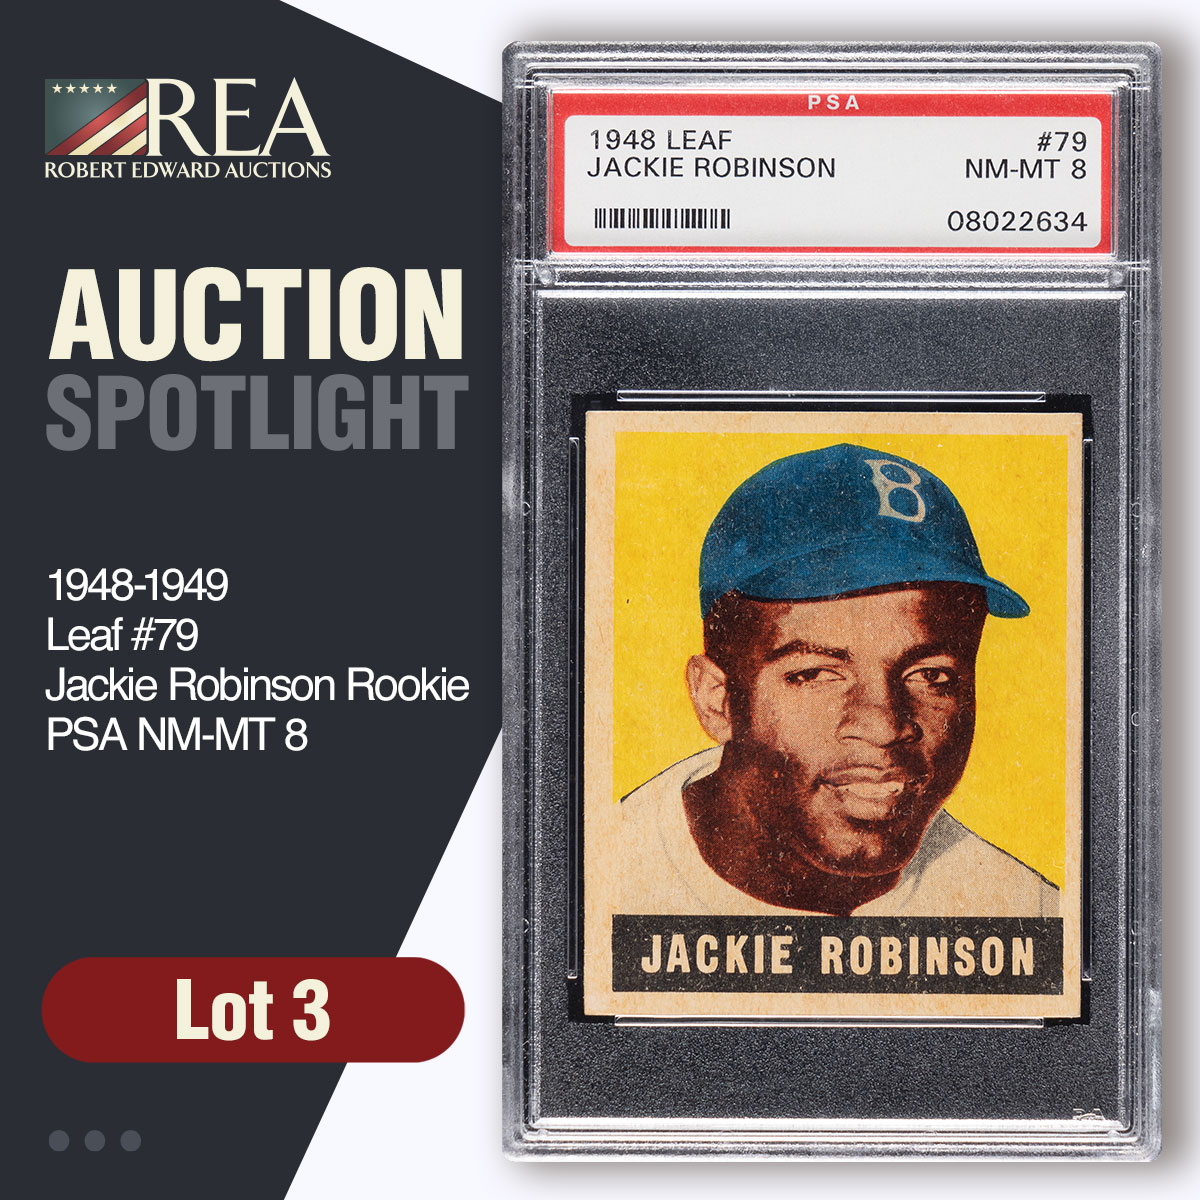 Summer Auction Spotlight: Lot # 3: 1948-1949 Leaf #79 Jackie Robinson Rookie PSA NM-MT 8. Bid Now: https://t.co/sAyriLmM21
@reaonline @psacard #auction #thehobby #Baseballcards #Leaf #1940s #whodoyoucollect #cardcollector #collection https://t.co/9QVEFzsqb5